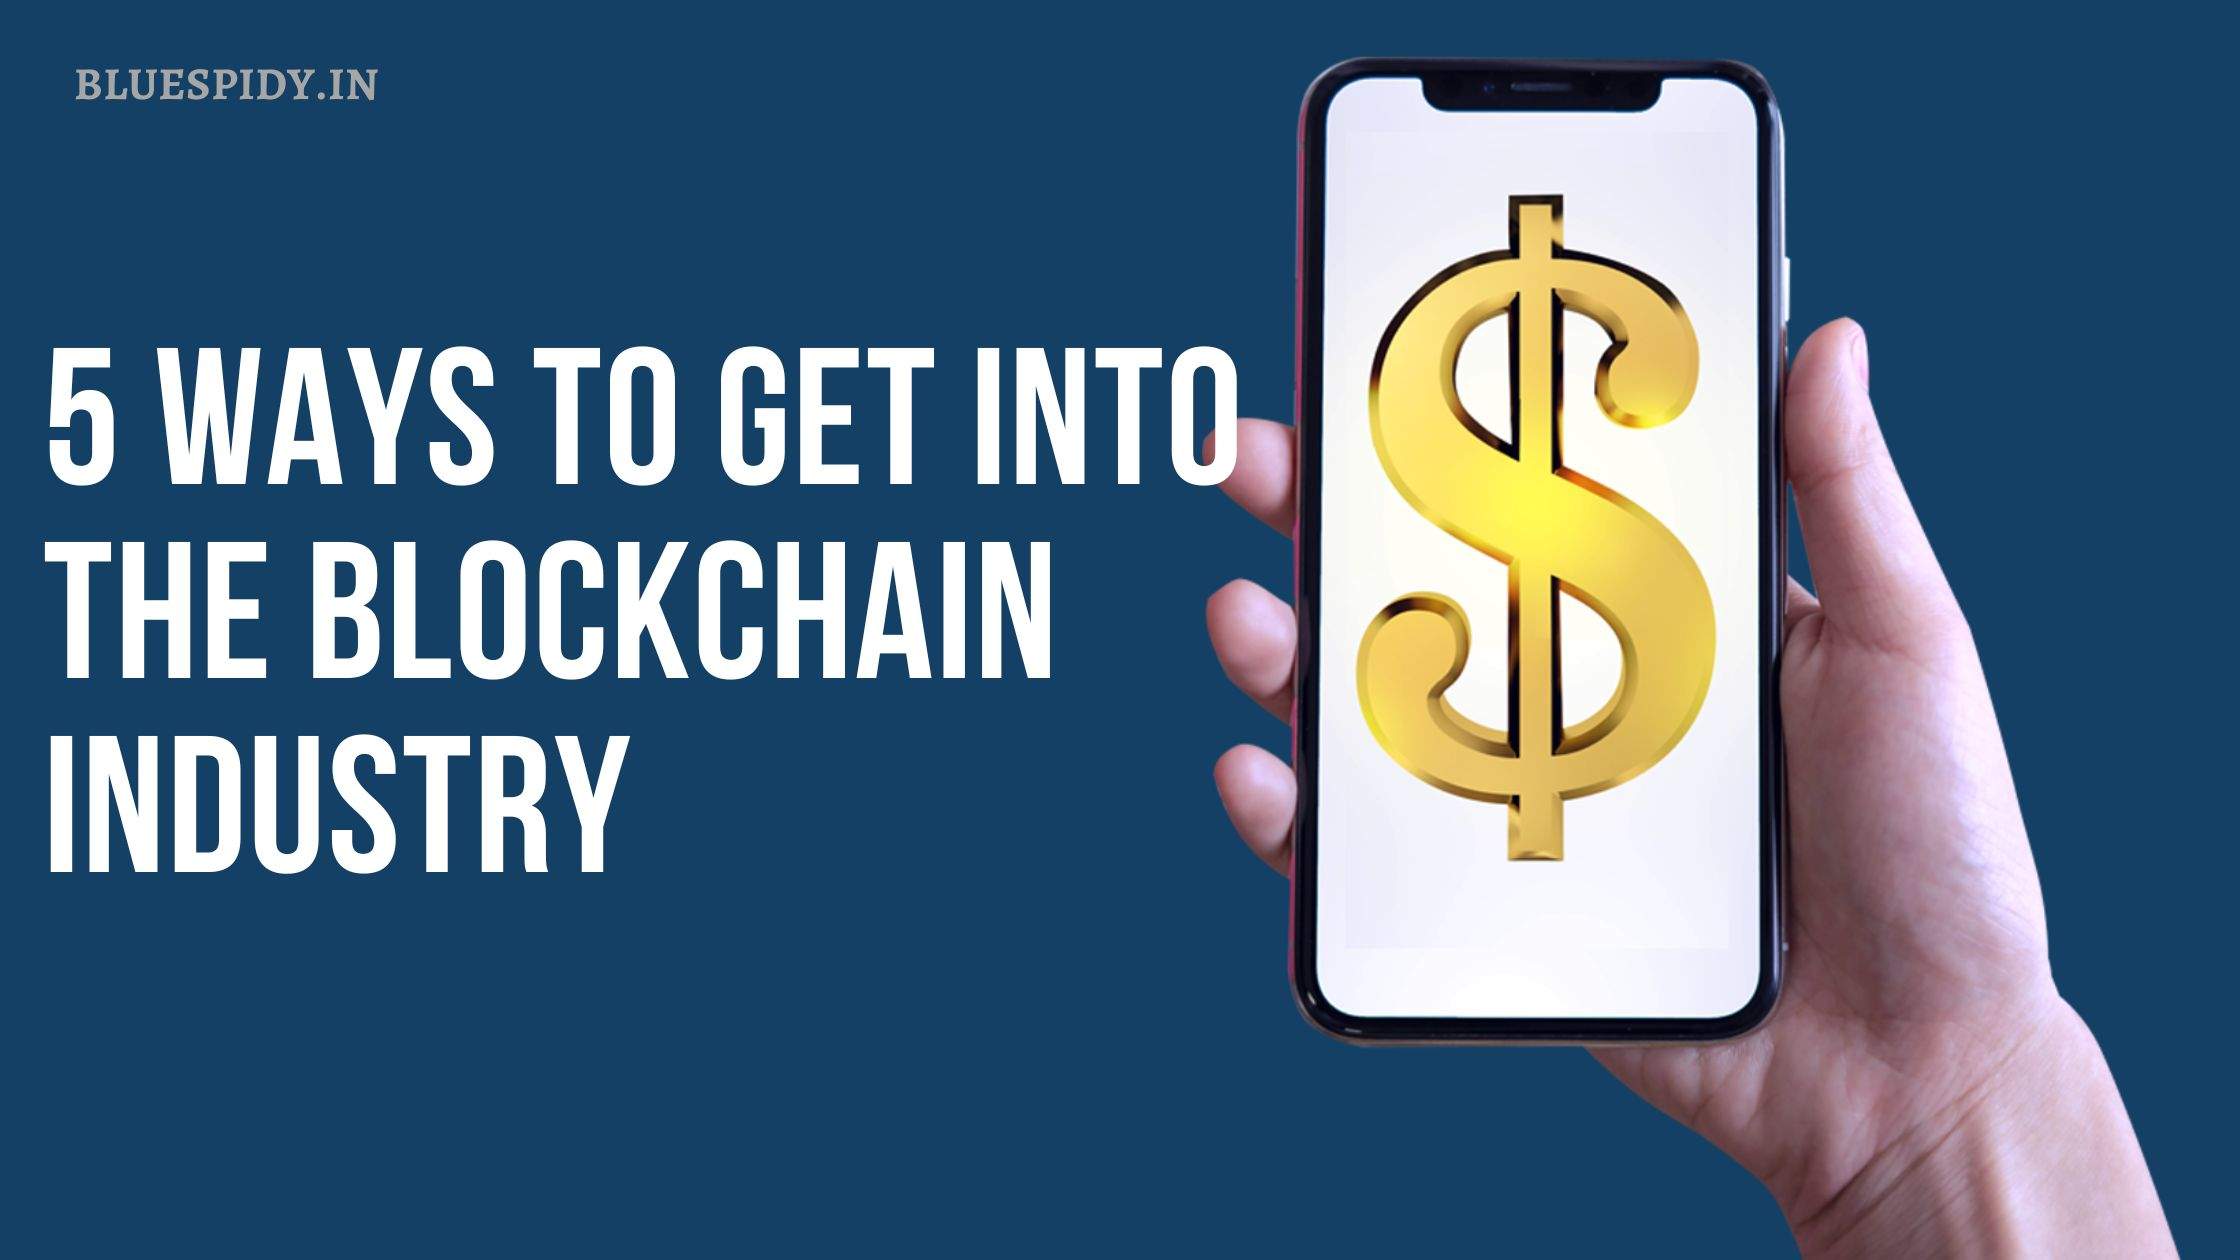 5 Ways to Get Into the Blockchain Industry